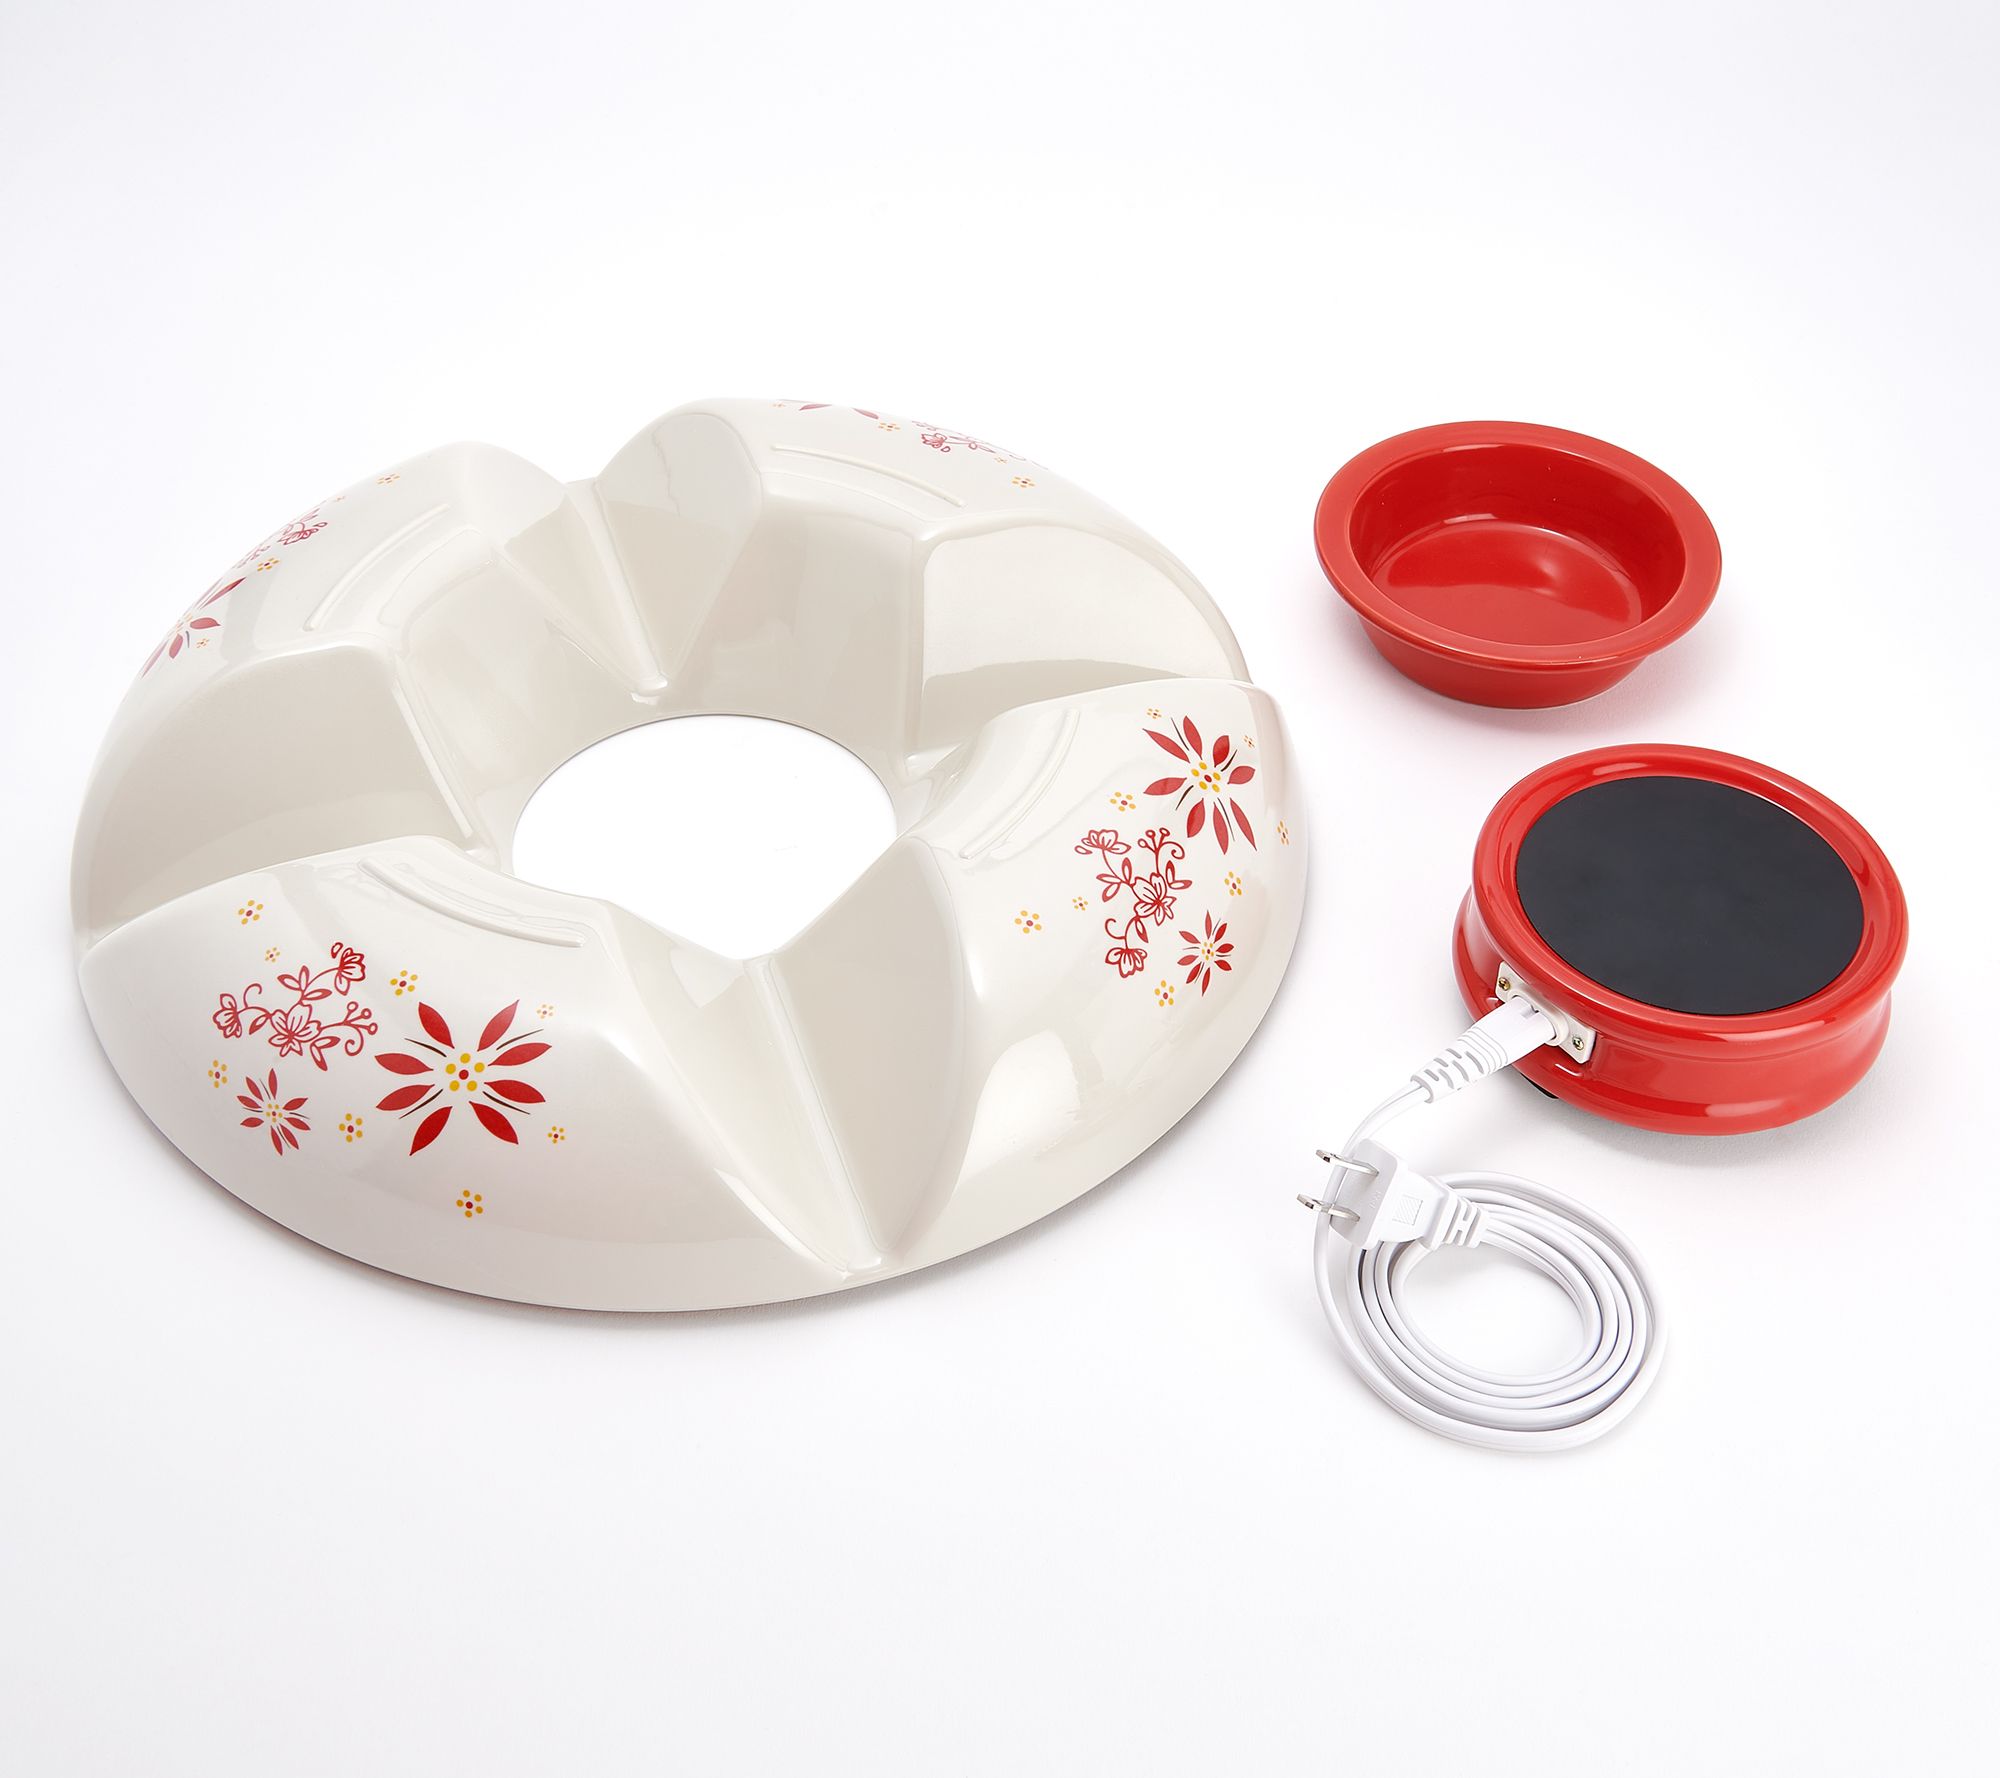 Cooks Essentials Chip and Dip Warmer with Removable Heating Base